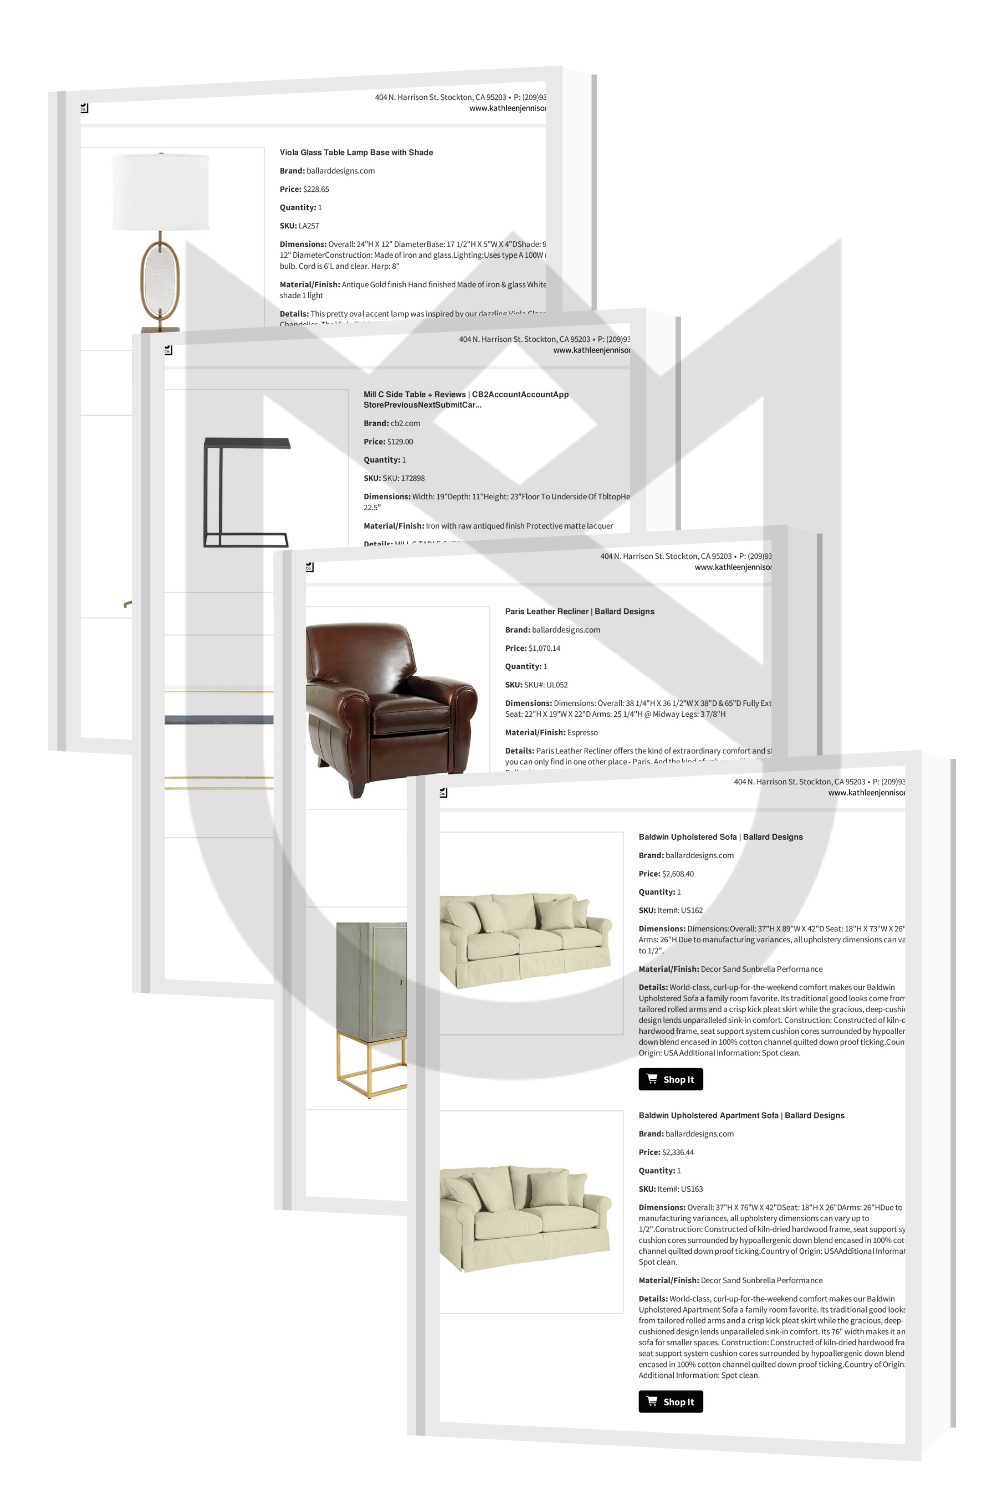 THE SHOPPING LIST: This is a few sheets out of the shopping list for this client. You will notice each item is displayed with all the information, size material, care and a clickable link so you can purchase the item